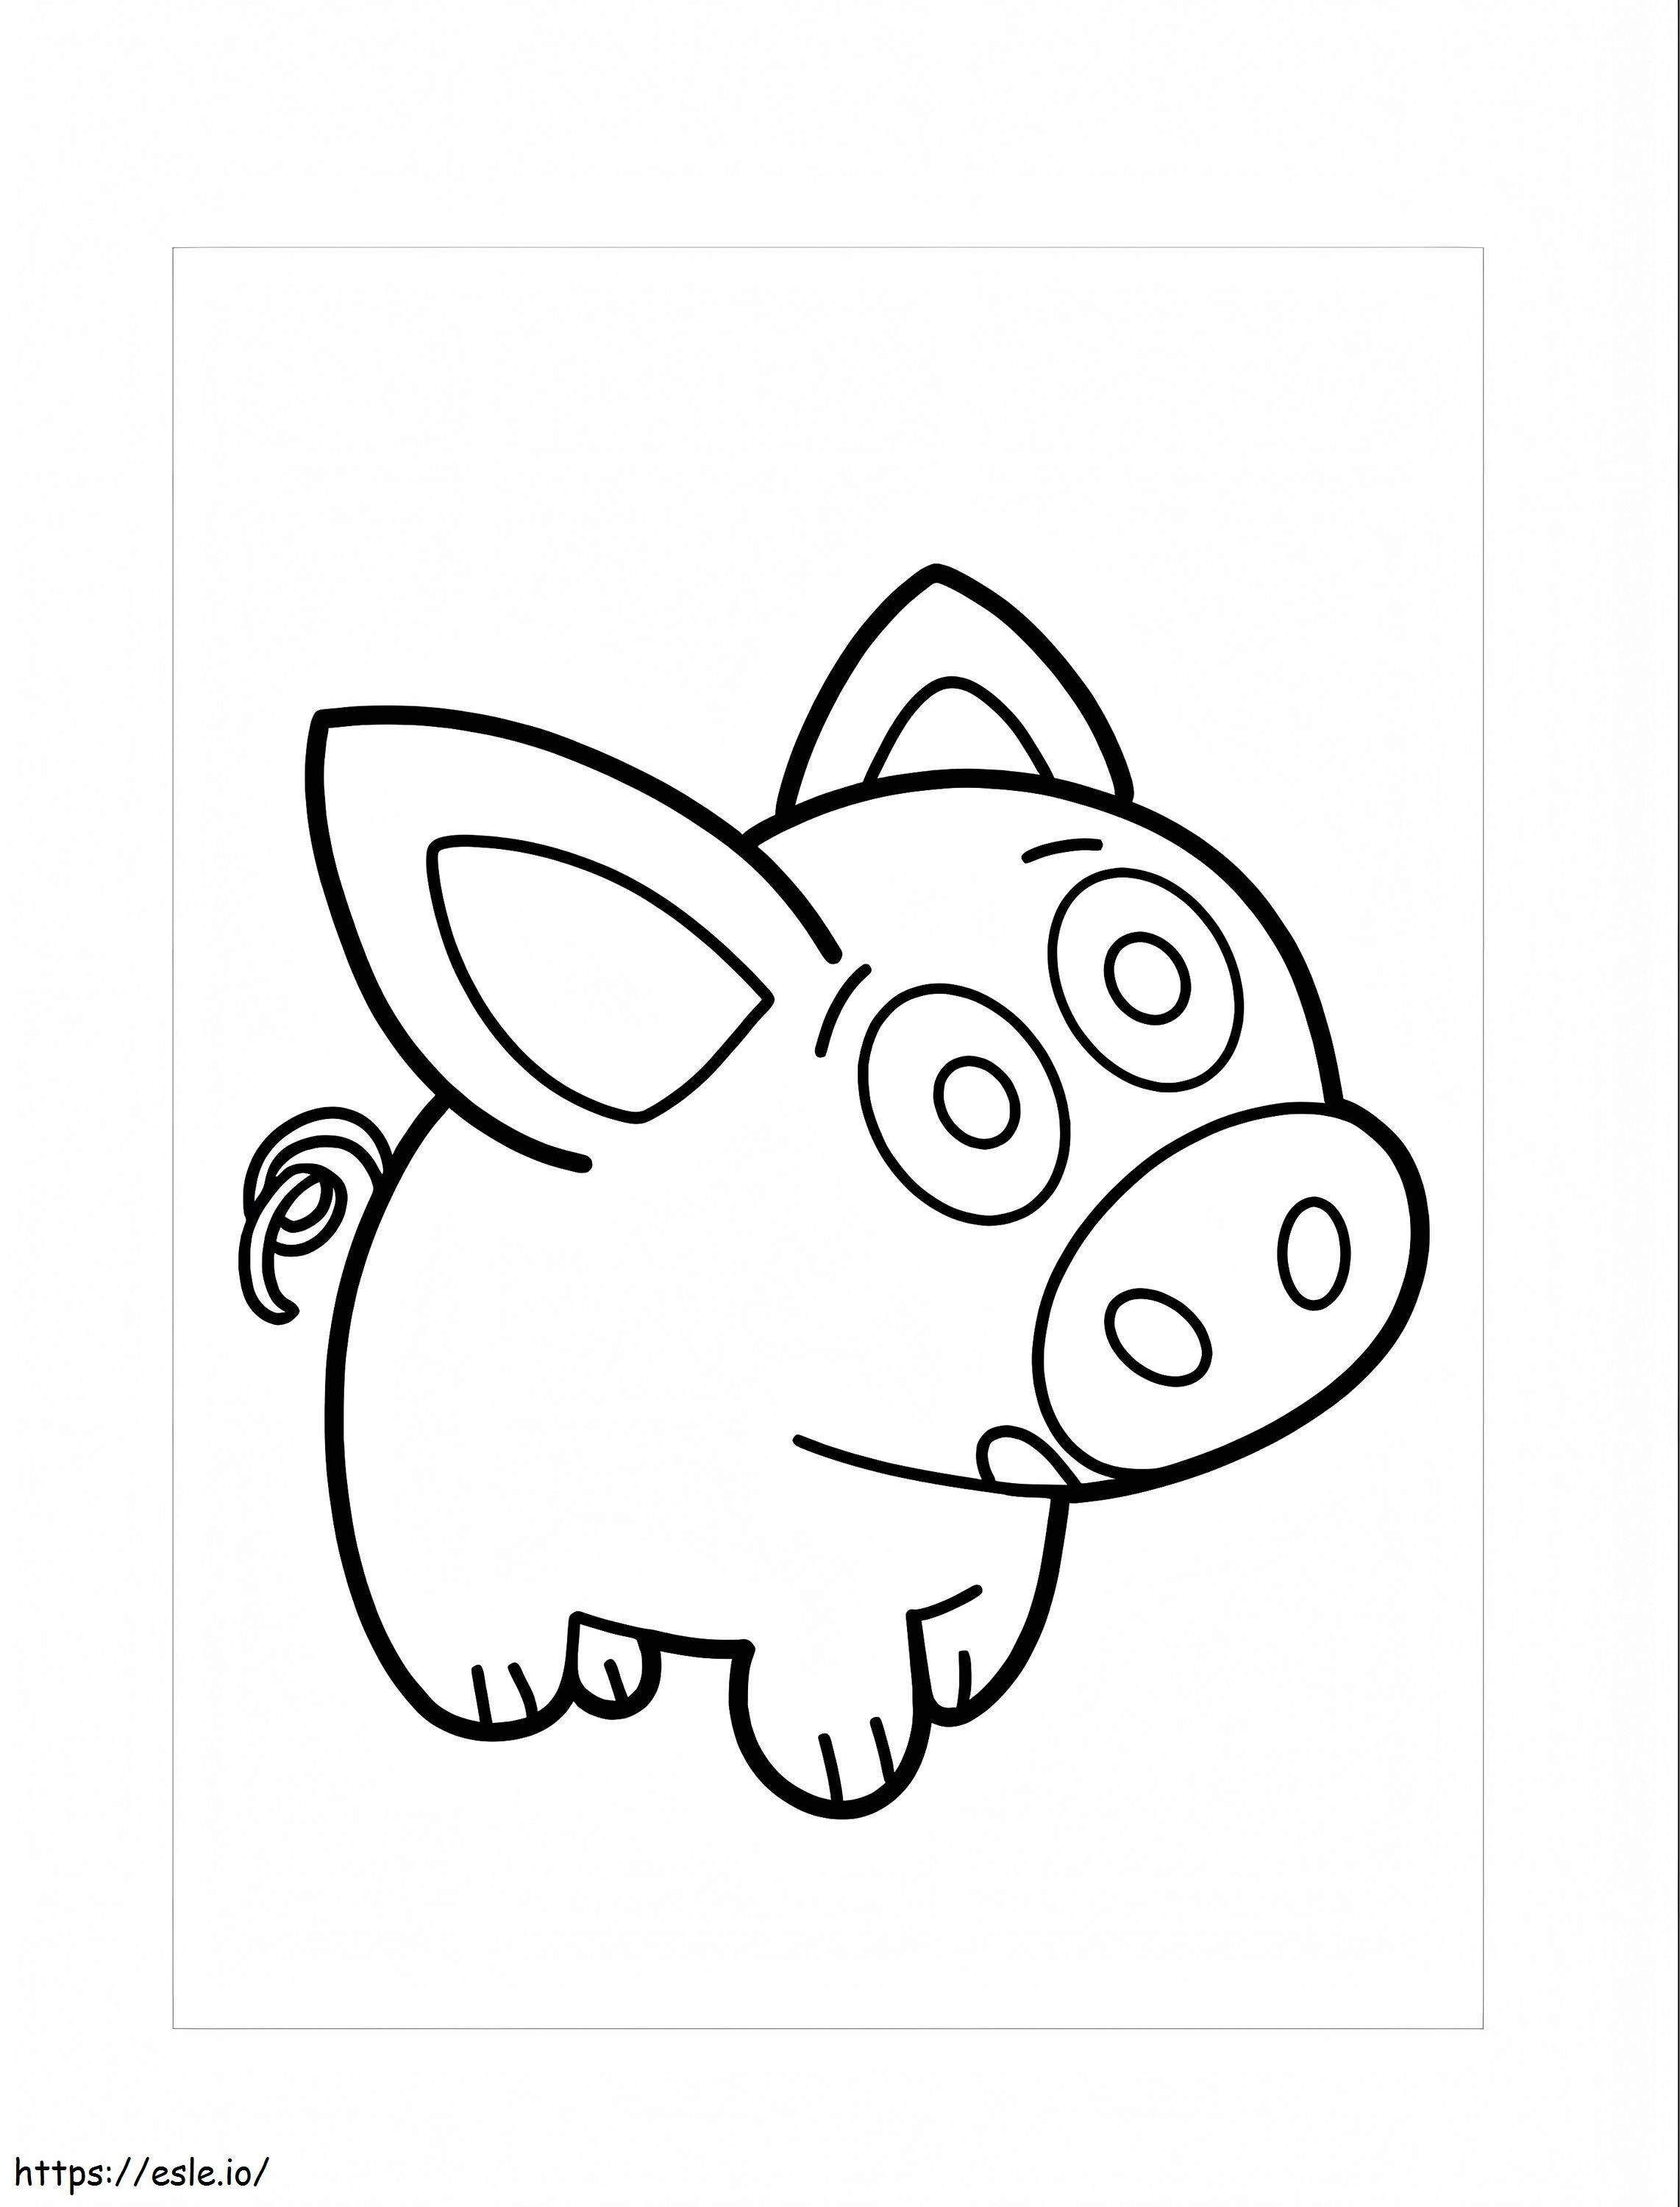 Cute Pig coloring page